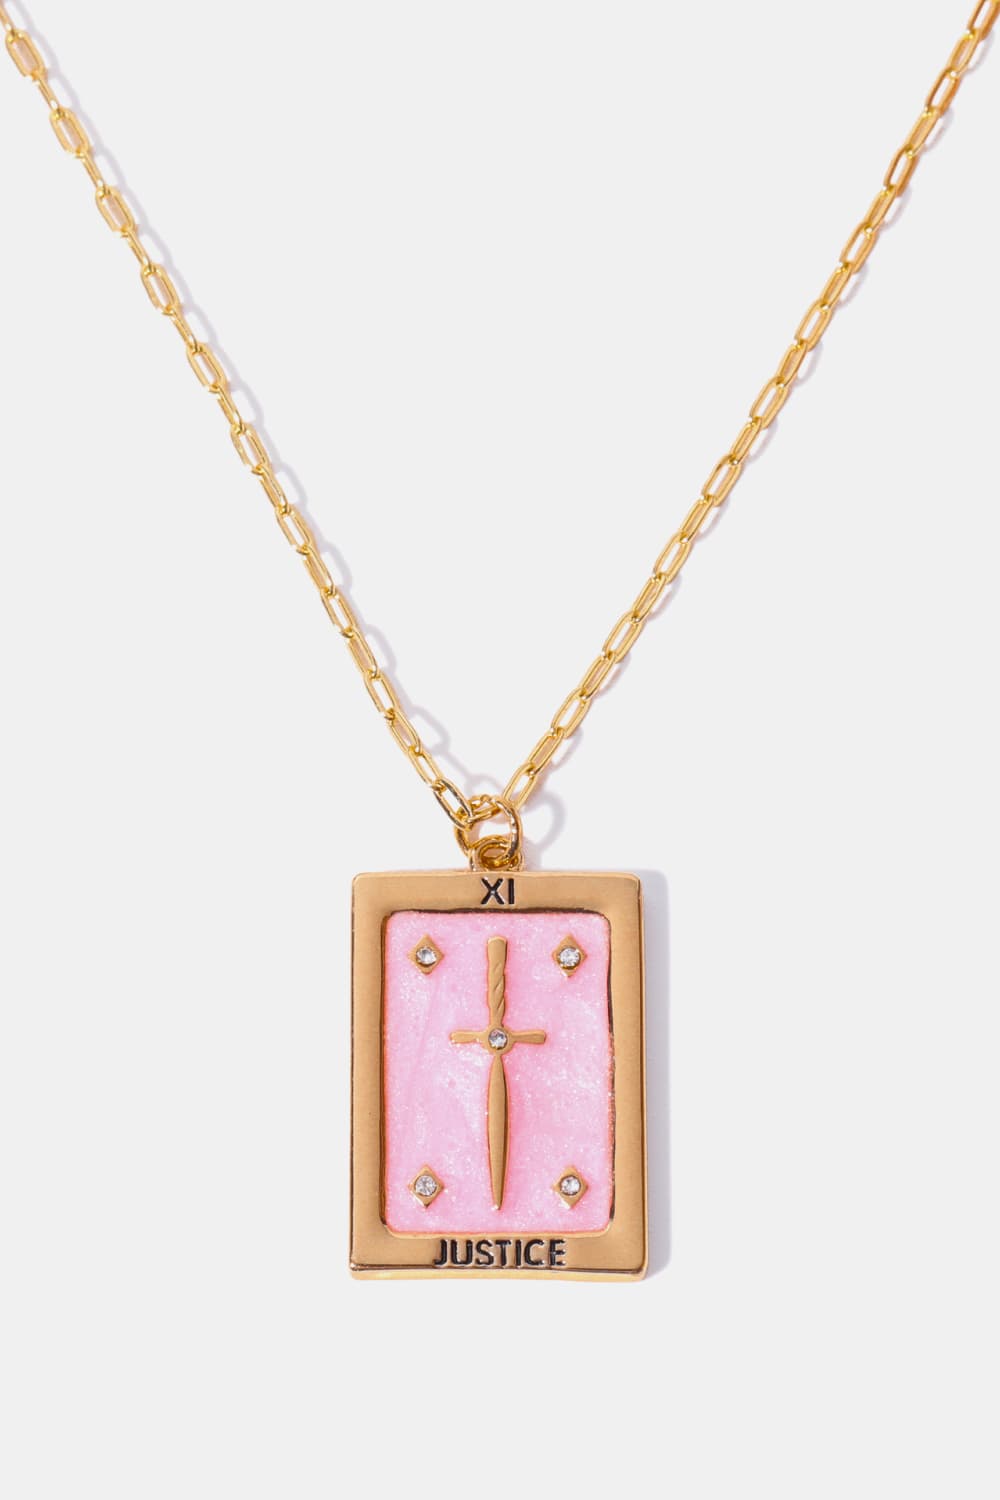 Tarot Card Pendant Copper Necklace - Coco and lulu boutique 